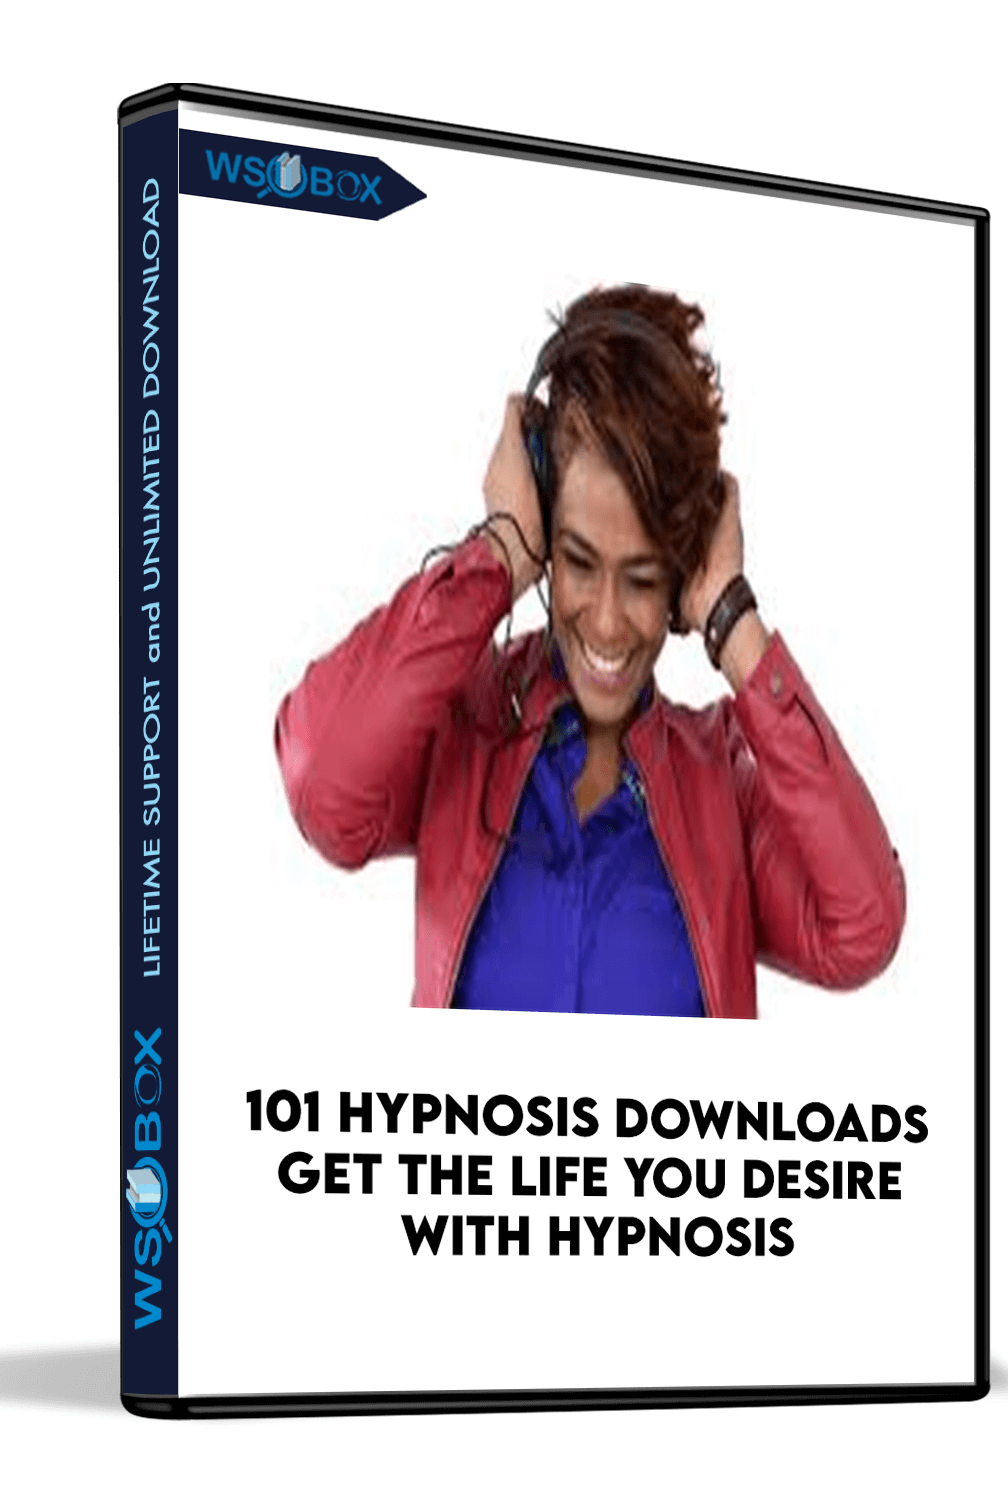 101 Hypnosis Downloads Get The Life You Desire with Hypnosis